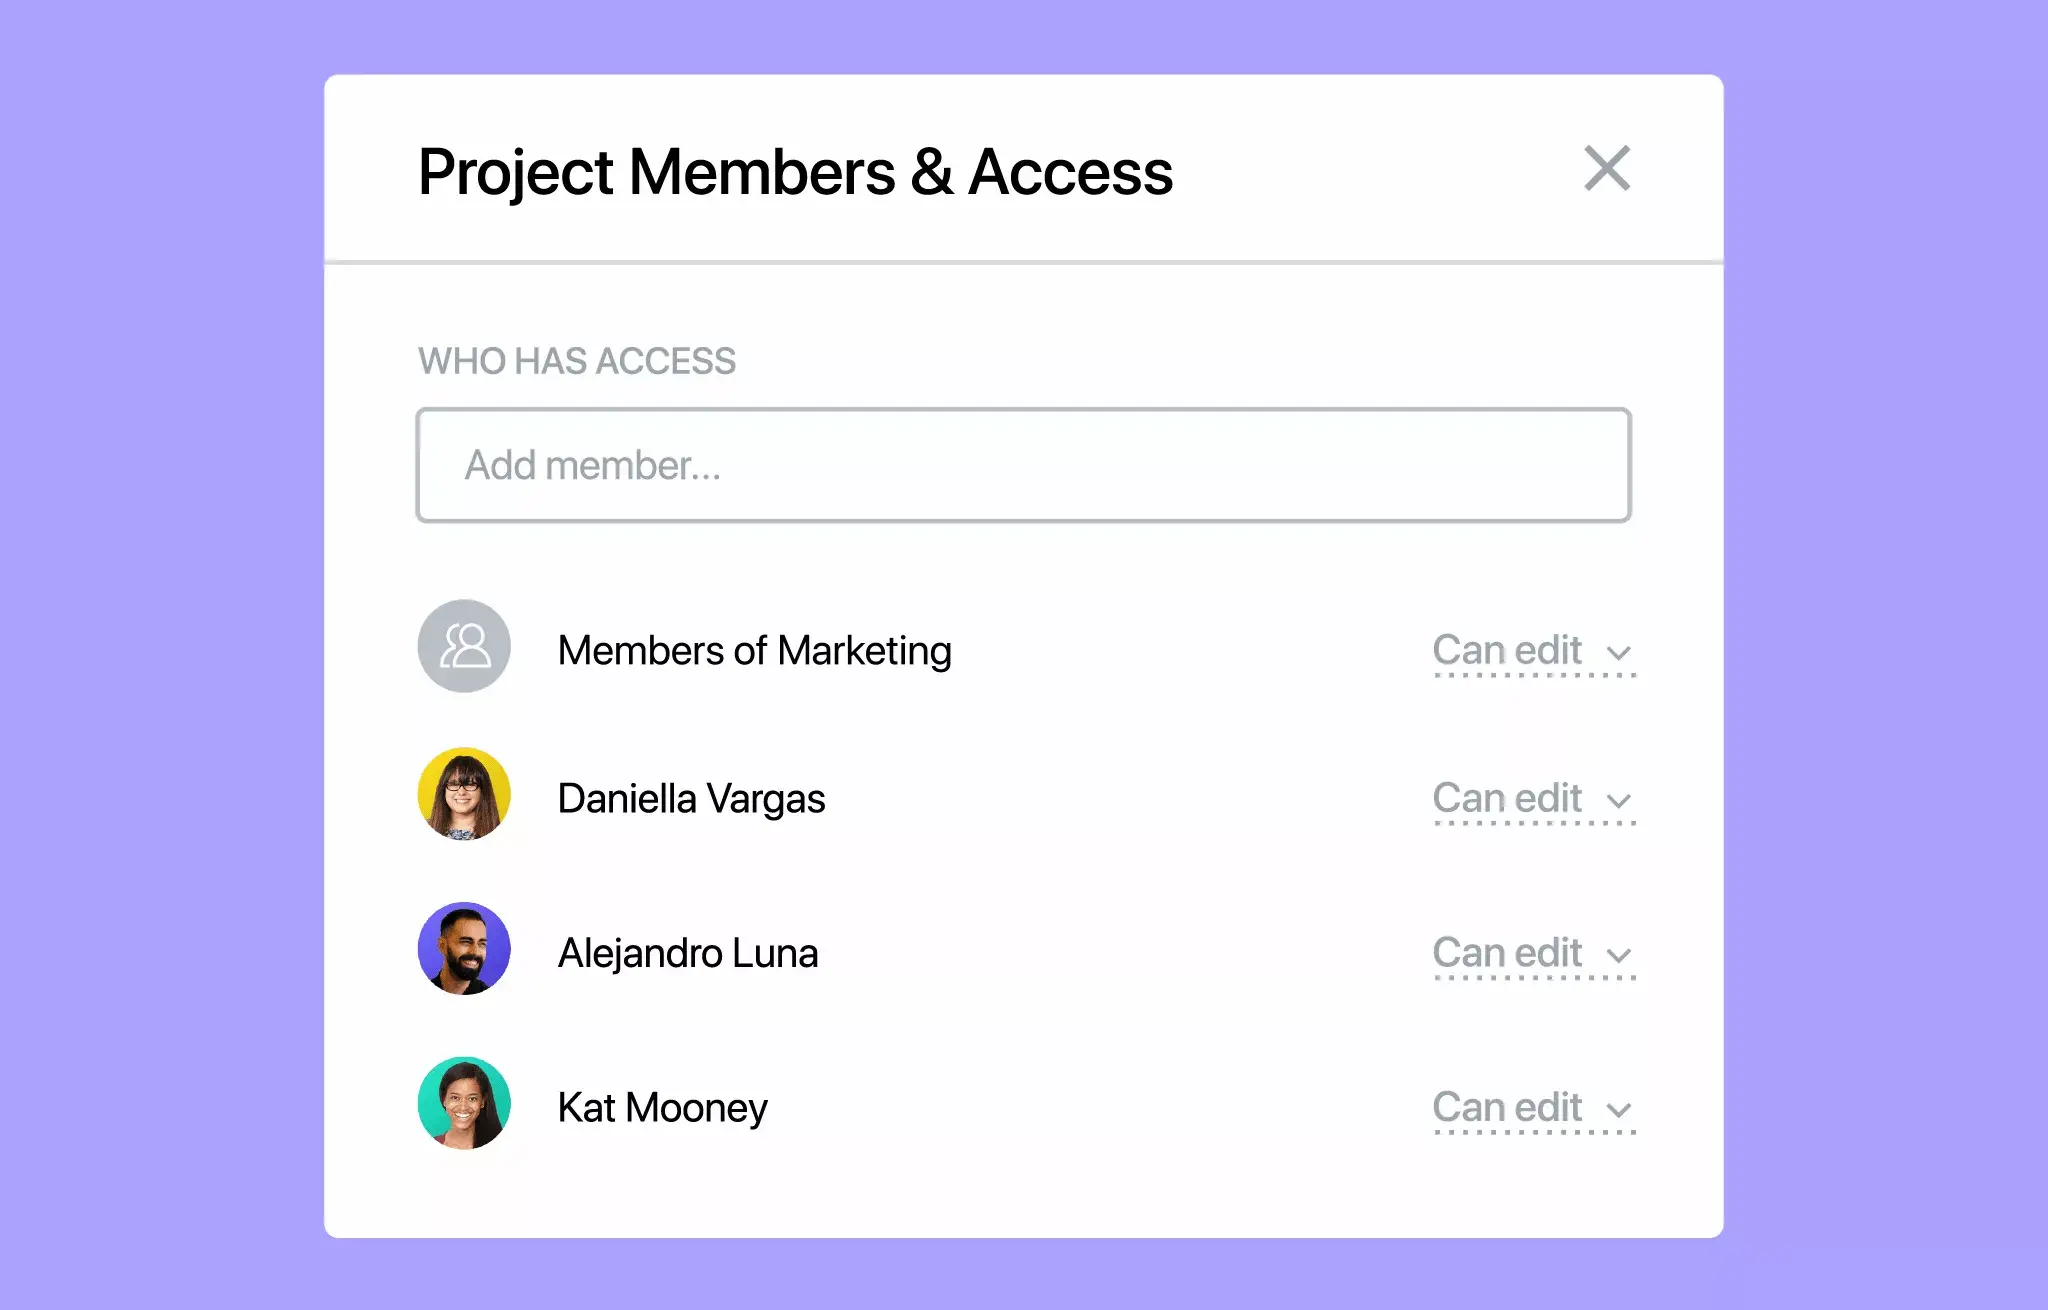 Lock it down: Introducing comment-only projects